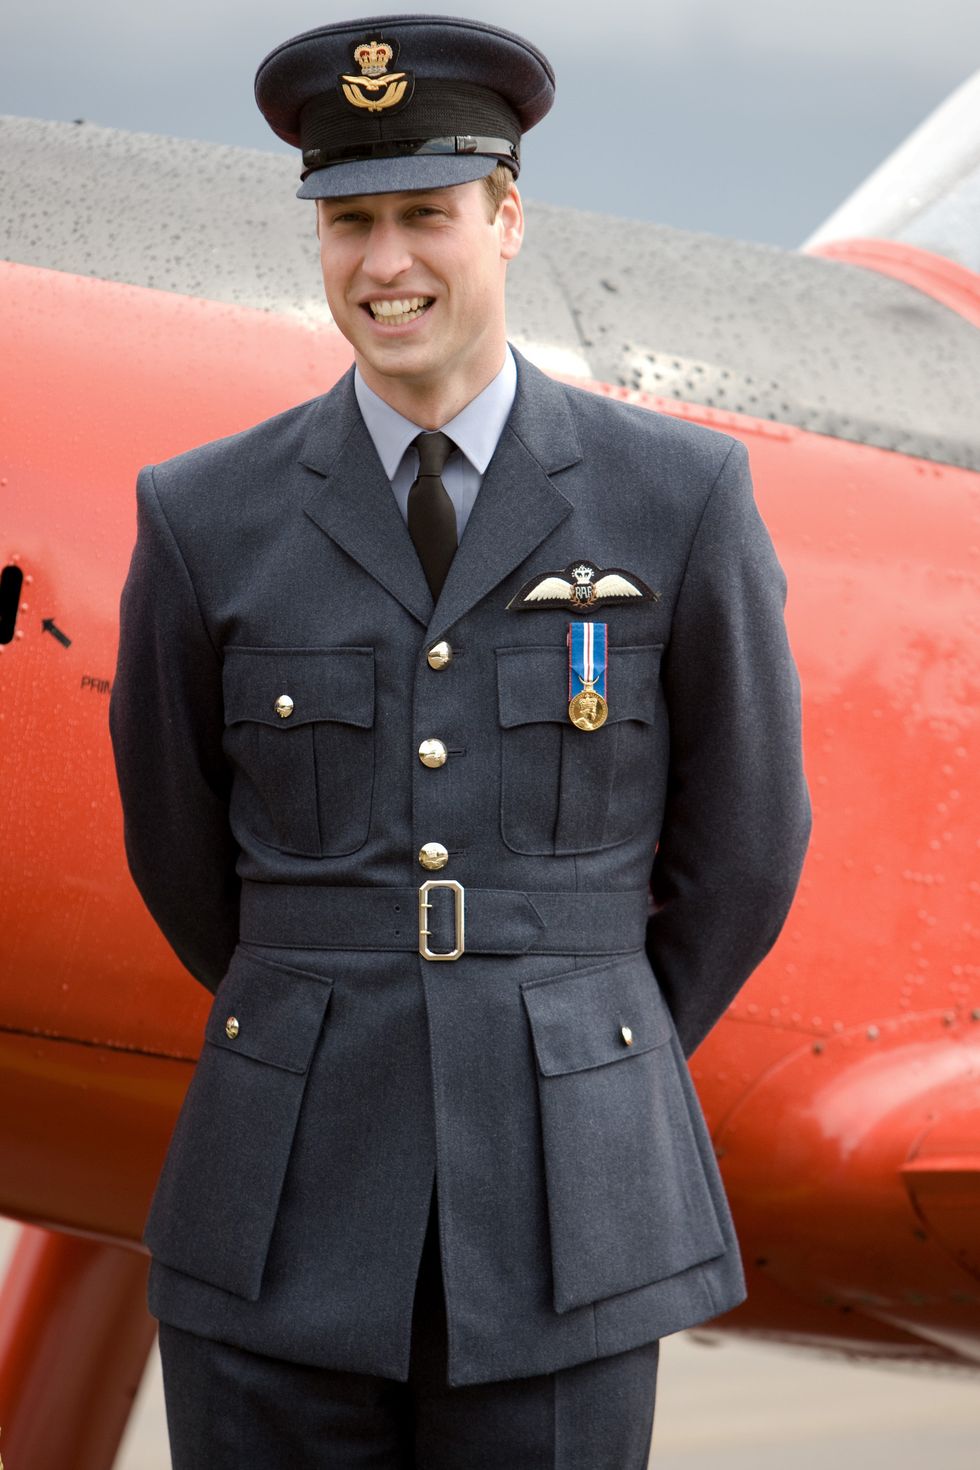 LINCOLNSHIRE, ENGLAND - APRIL 11: After receiving his RAF wings in a graduation ceremony, Prince William inspects the aircraft and helicopters at the Central Flying School at RAF Cranwell, in Sleaford on April 11, 2008 in Lincolnshire, England. (Photo by Tim Graham/Getty Images) *** Local Caption *** Prince William